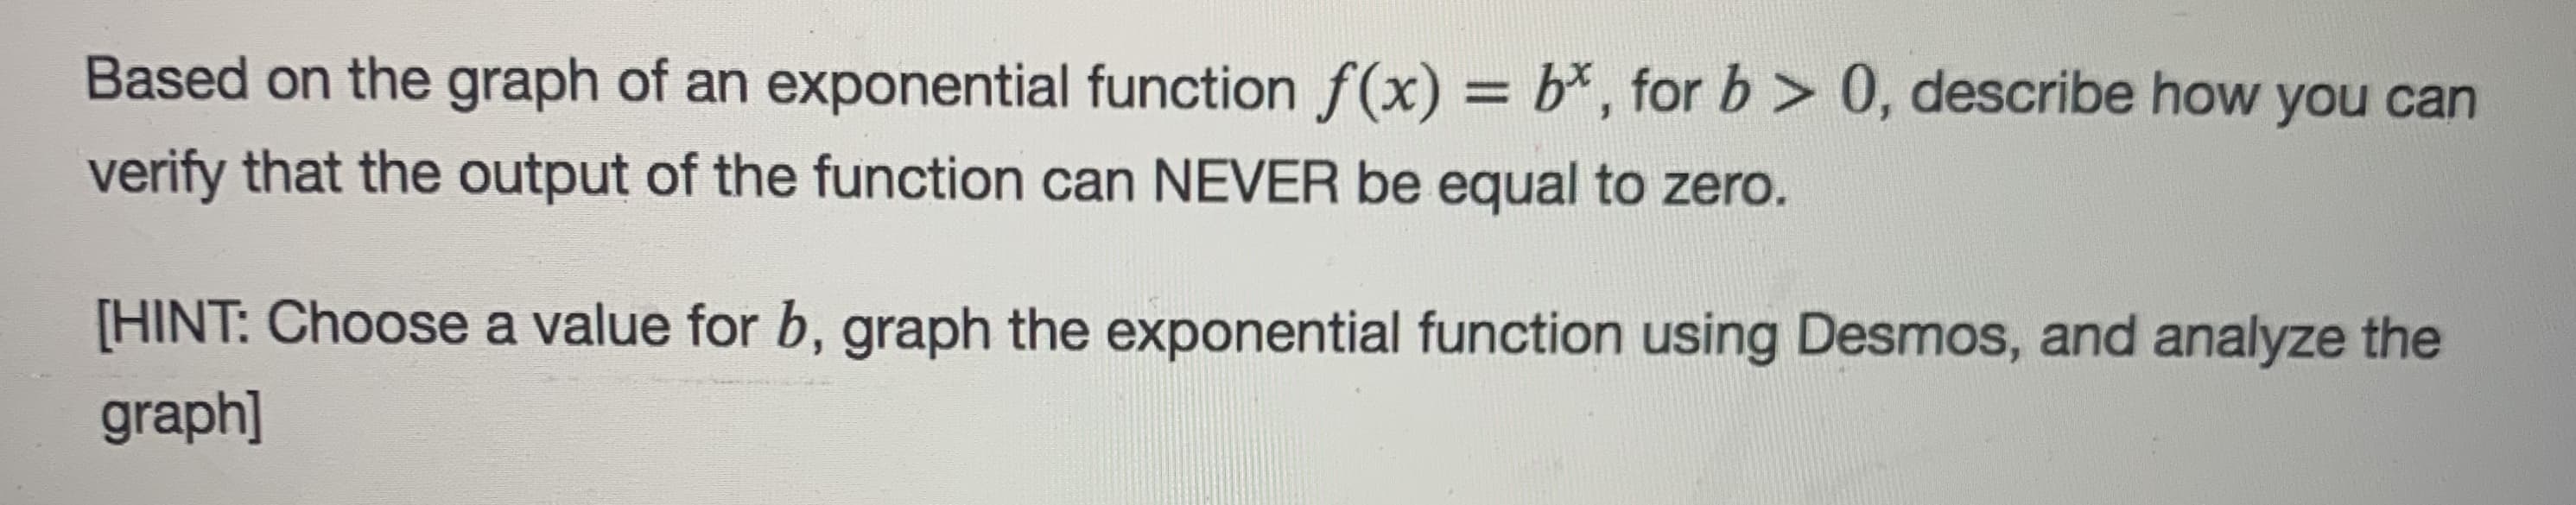 Based on the graph of an exponential function f(x) = b*, for b > 0, describe how you can
verify that the output of the function can NEVER be equal to zero.
[HINT: Choose a value for b, graph the exponential function using Desmos, and analyze the
graph]
